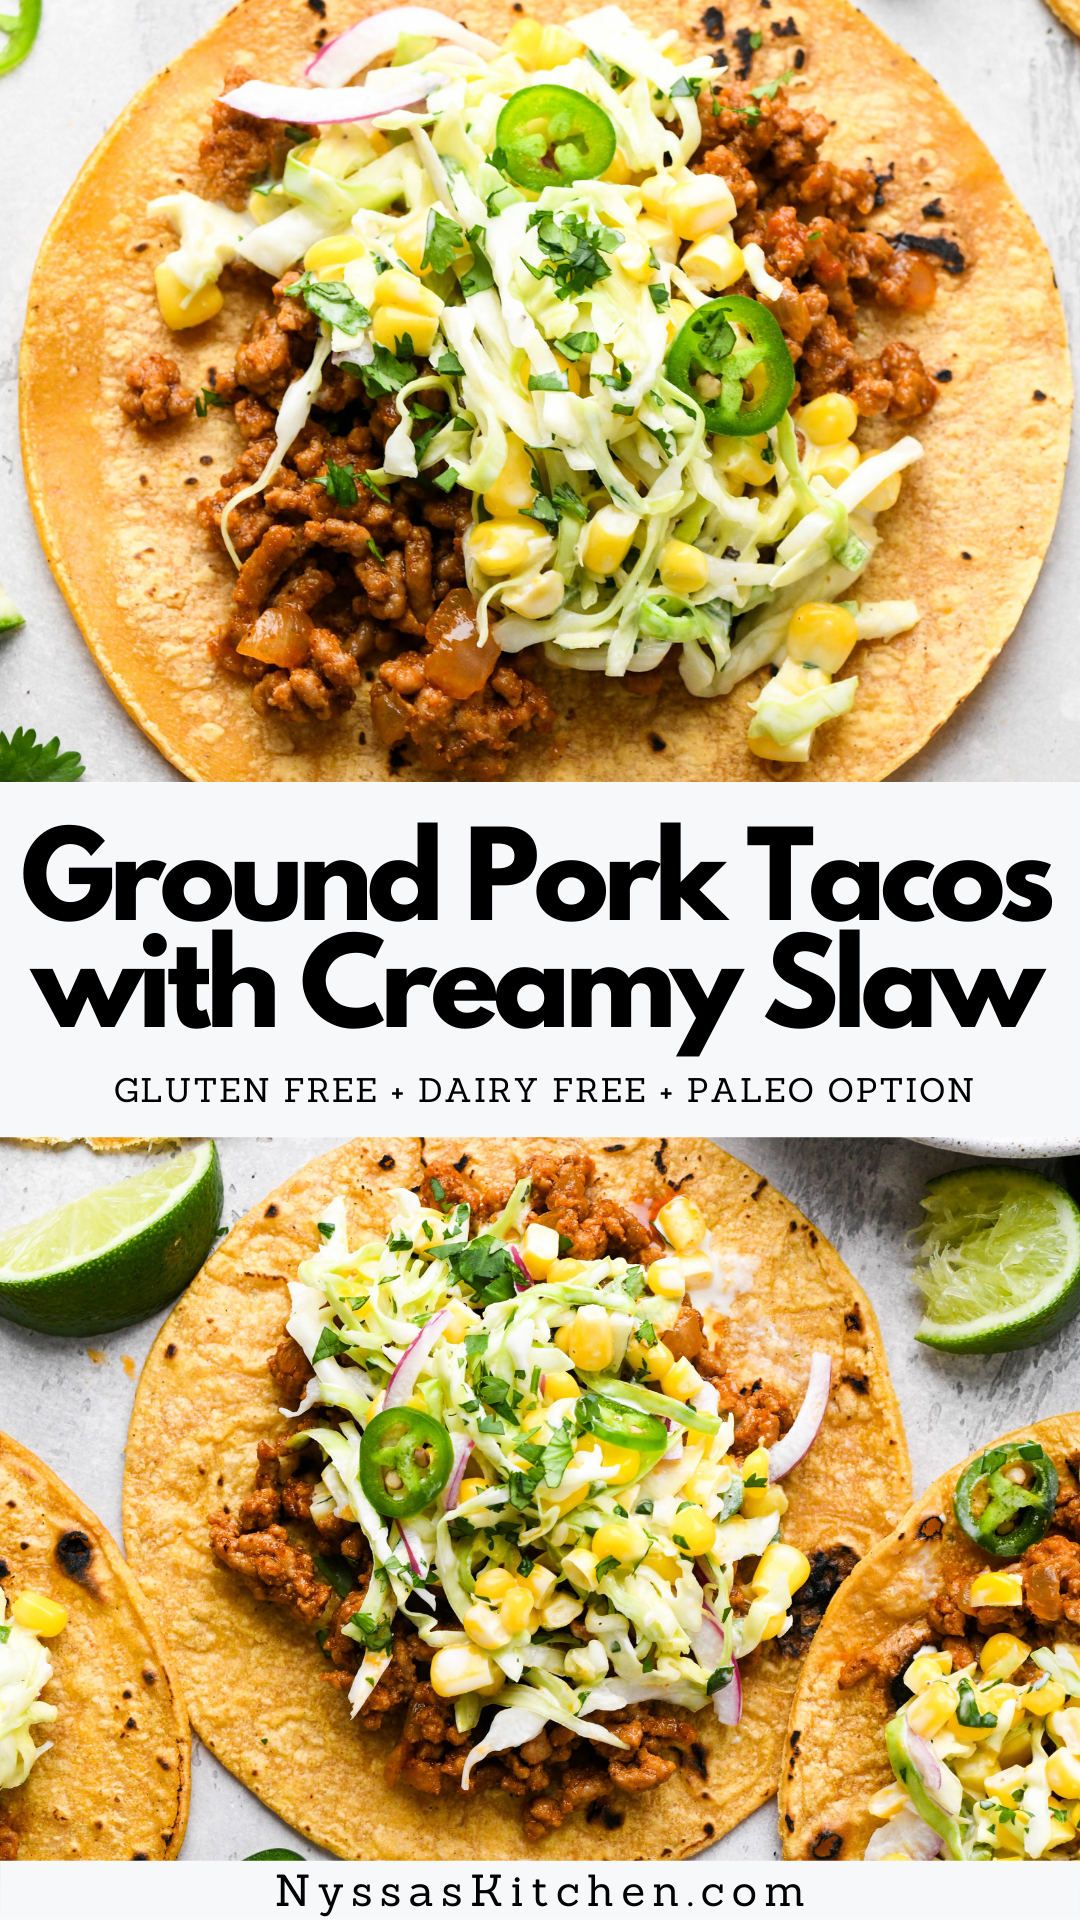 These ground pork tacos with creamy slaw are a simple and flavorful meal that is ready in less than 30 minutes! Perfect for taco night with the family and easy enough to make for a crowd. Made with a simple seasoning blend and a super creamy cabbage slaw with corn, cilantro, jalapeño, and lime. They are irresistibly delicious! Gluten free, dairy free, paleo option, and Whole30 option.